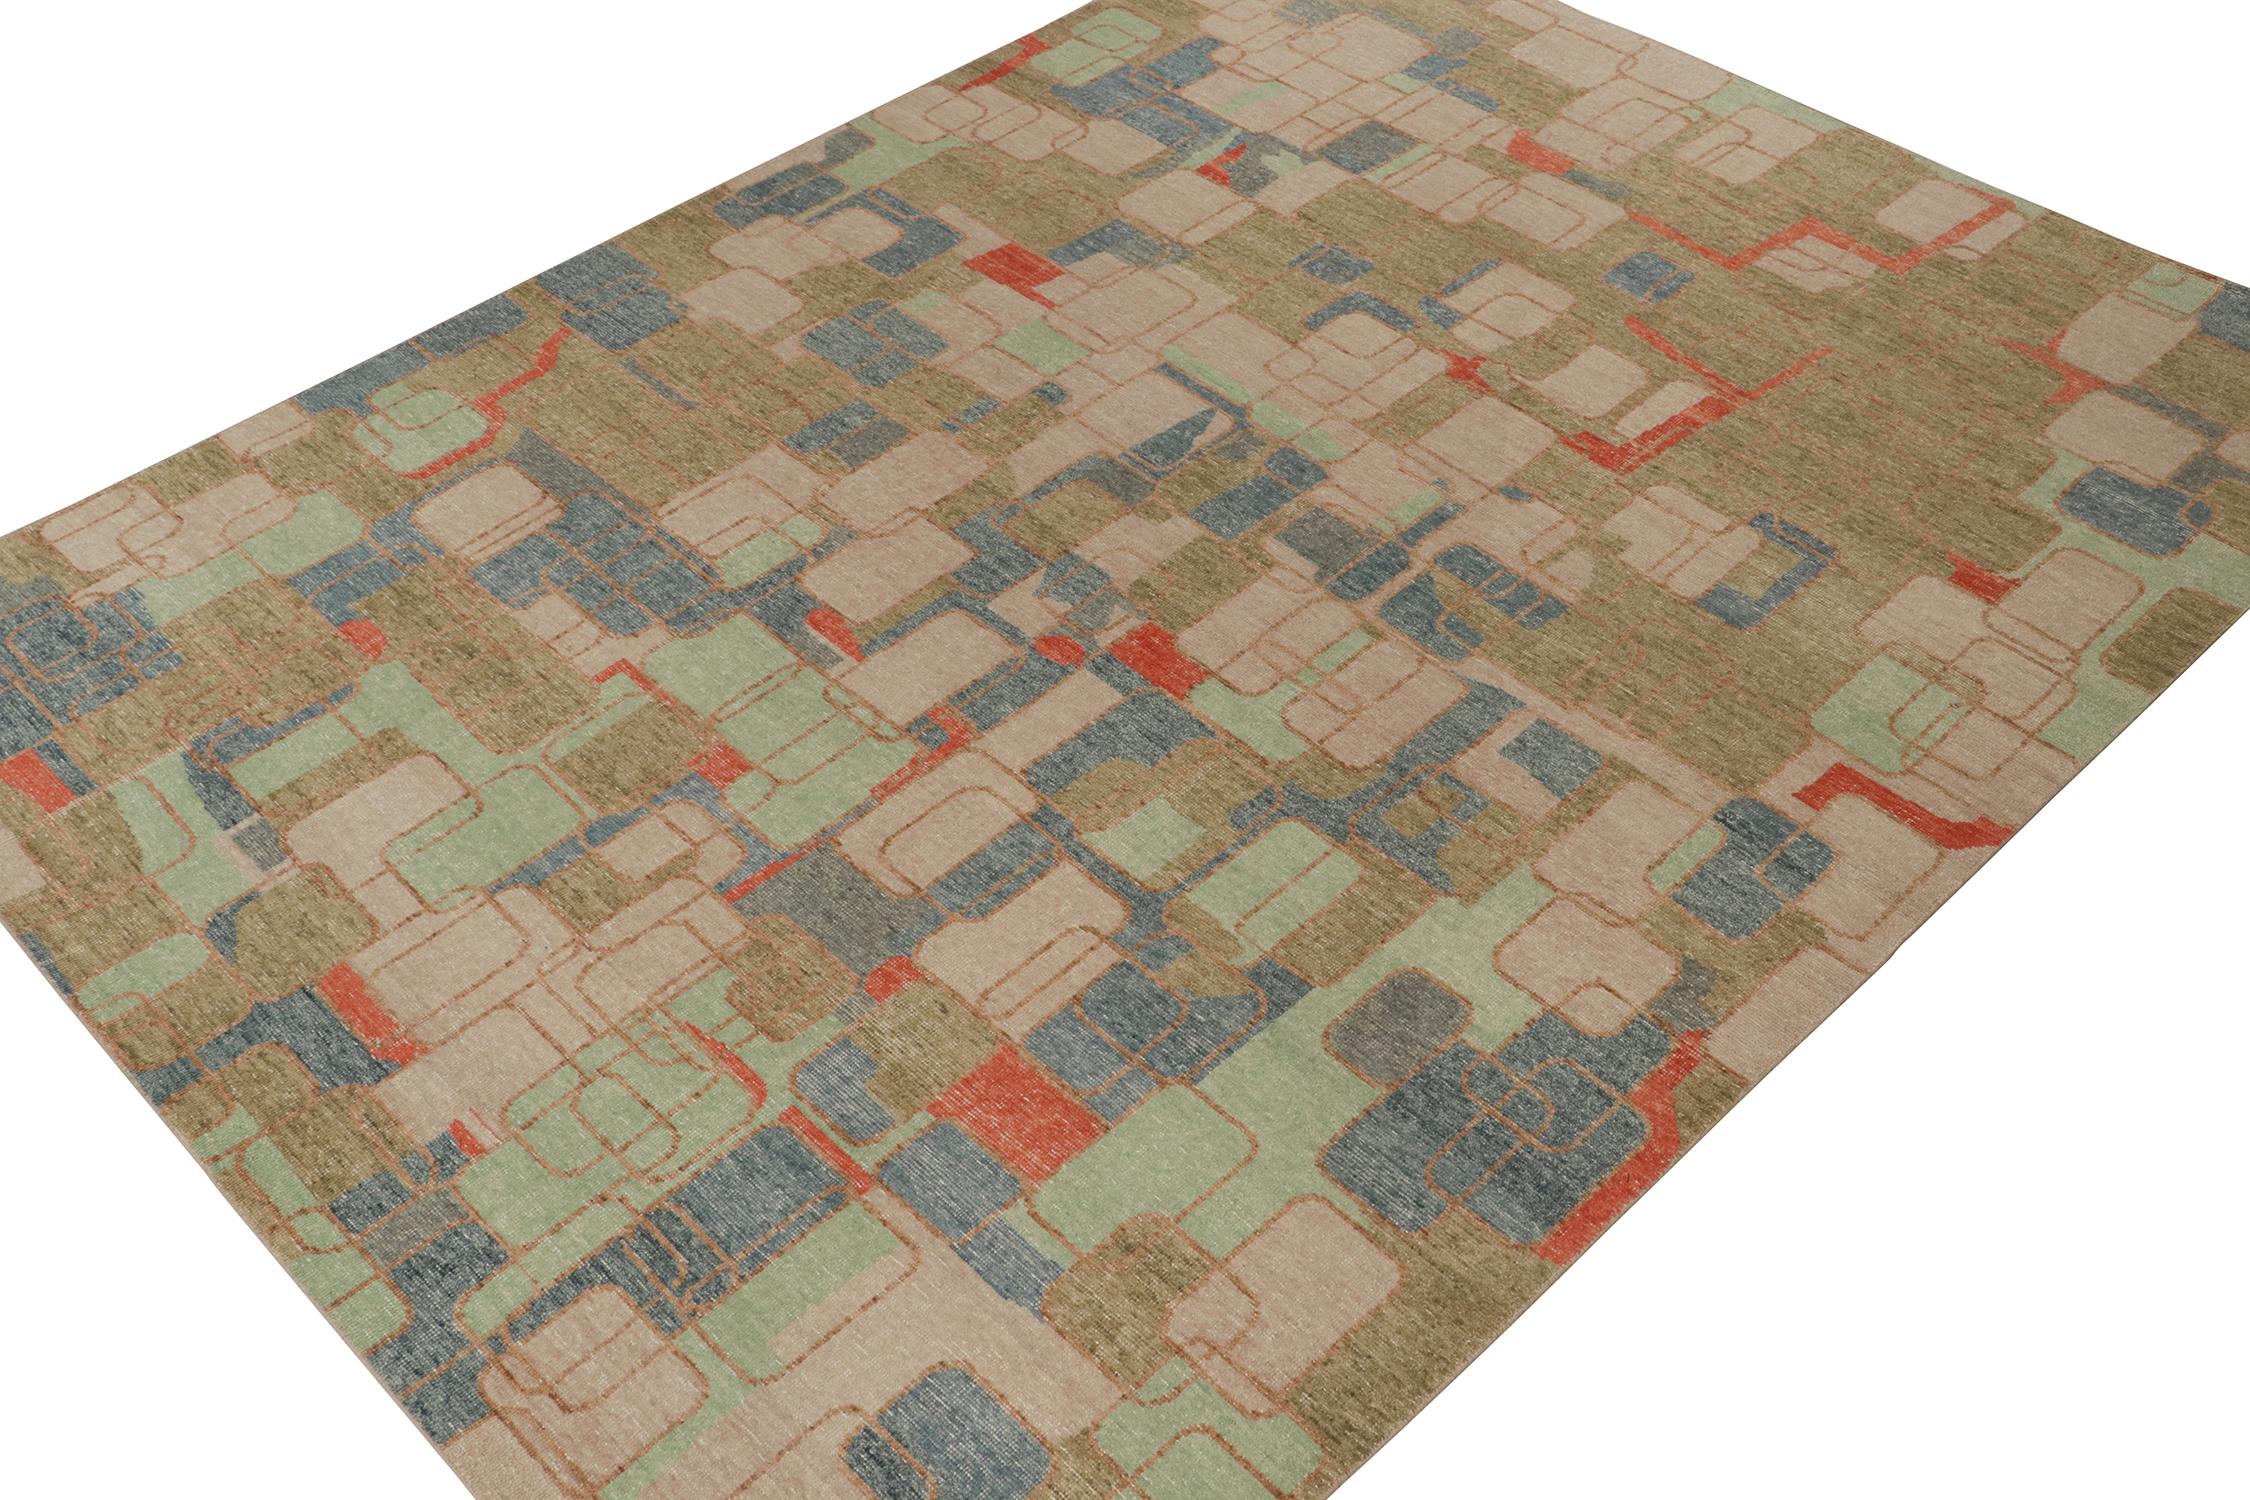 ????This 9x12 rug is a bold new addition to the Homage Collection by Rug & Kilim. Hand-knotted in wool and cotton, its design draws on mid-century modern rugs and recaptures it in distressed textural style.
Further on the Design:
This rug further